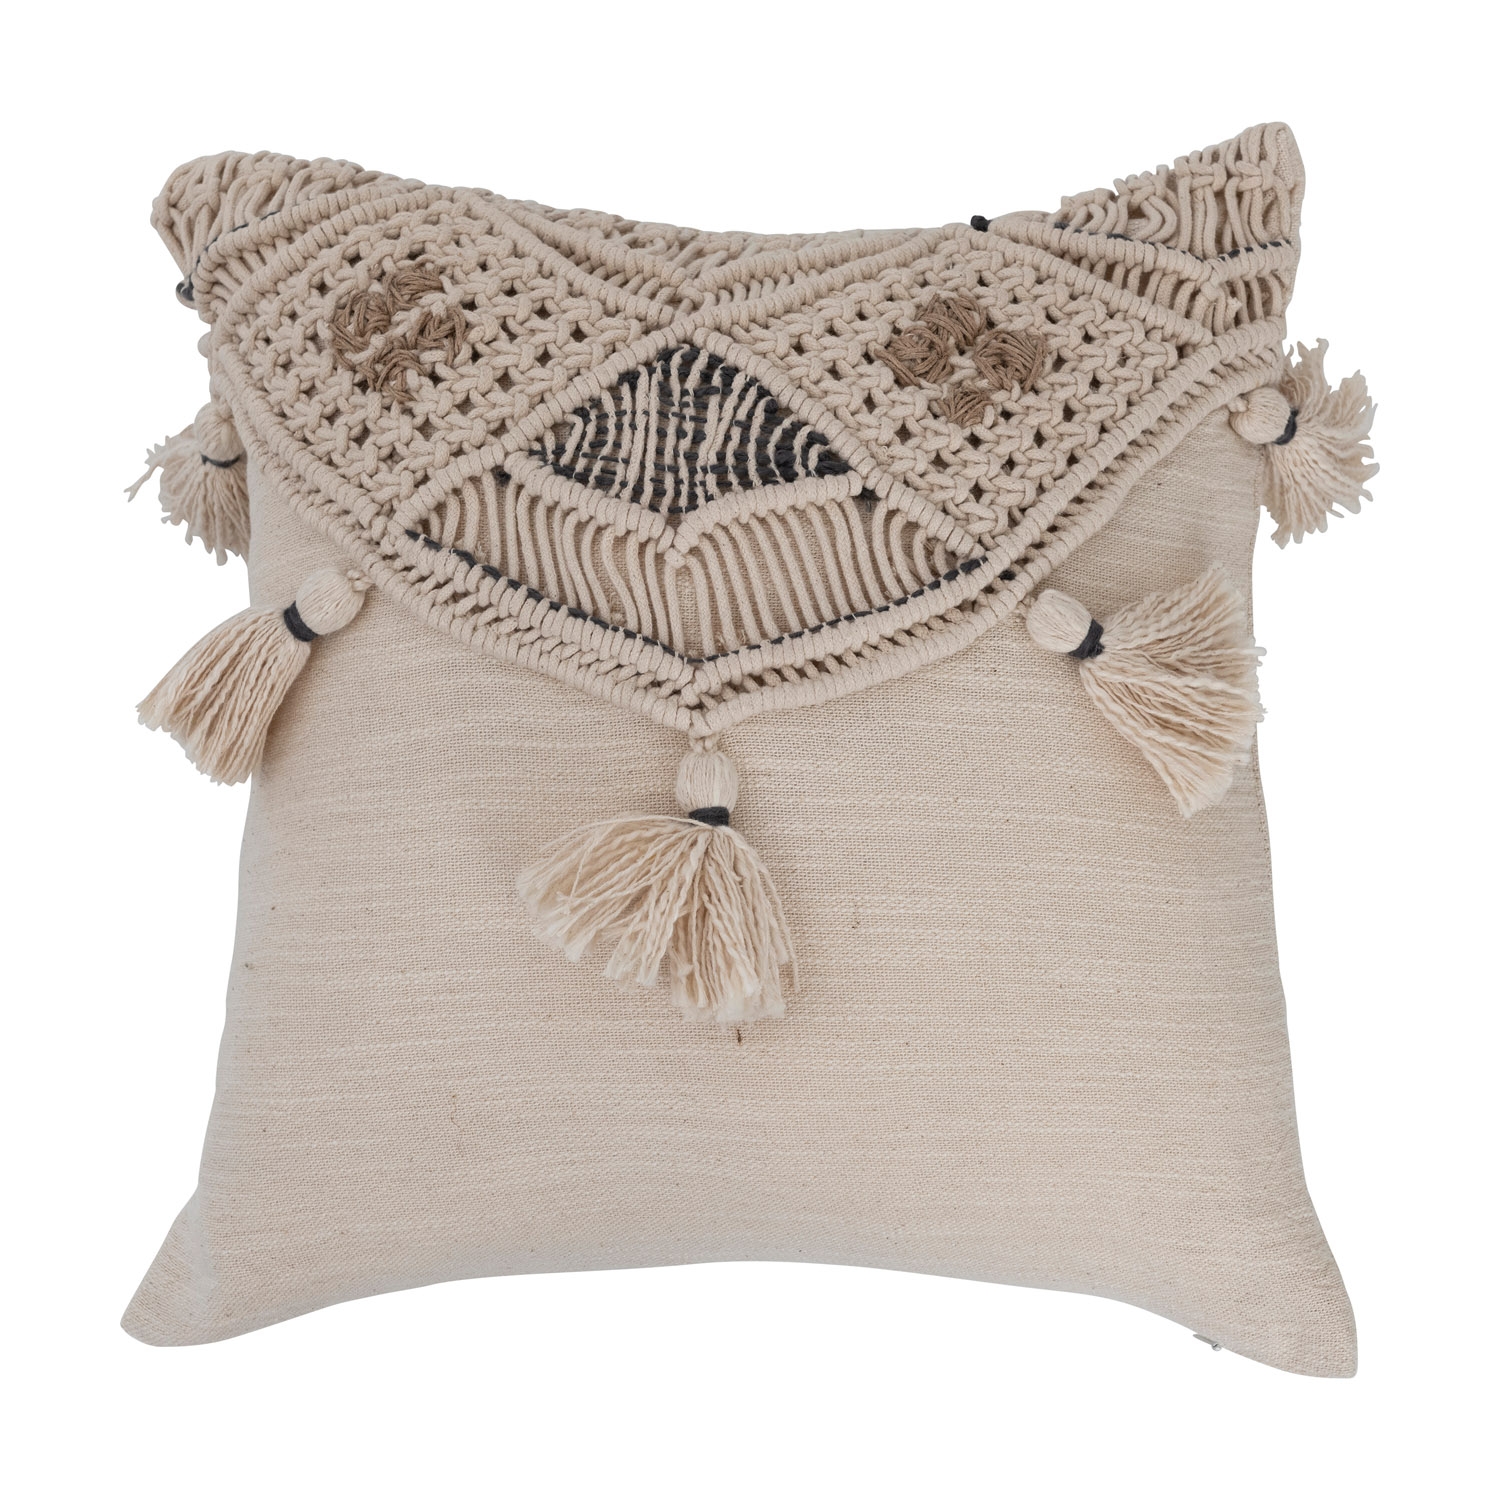 Hand-Woven Cotton and Jute Macramé Pillow with Tassels - Image 0